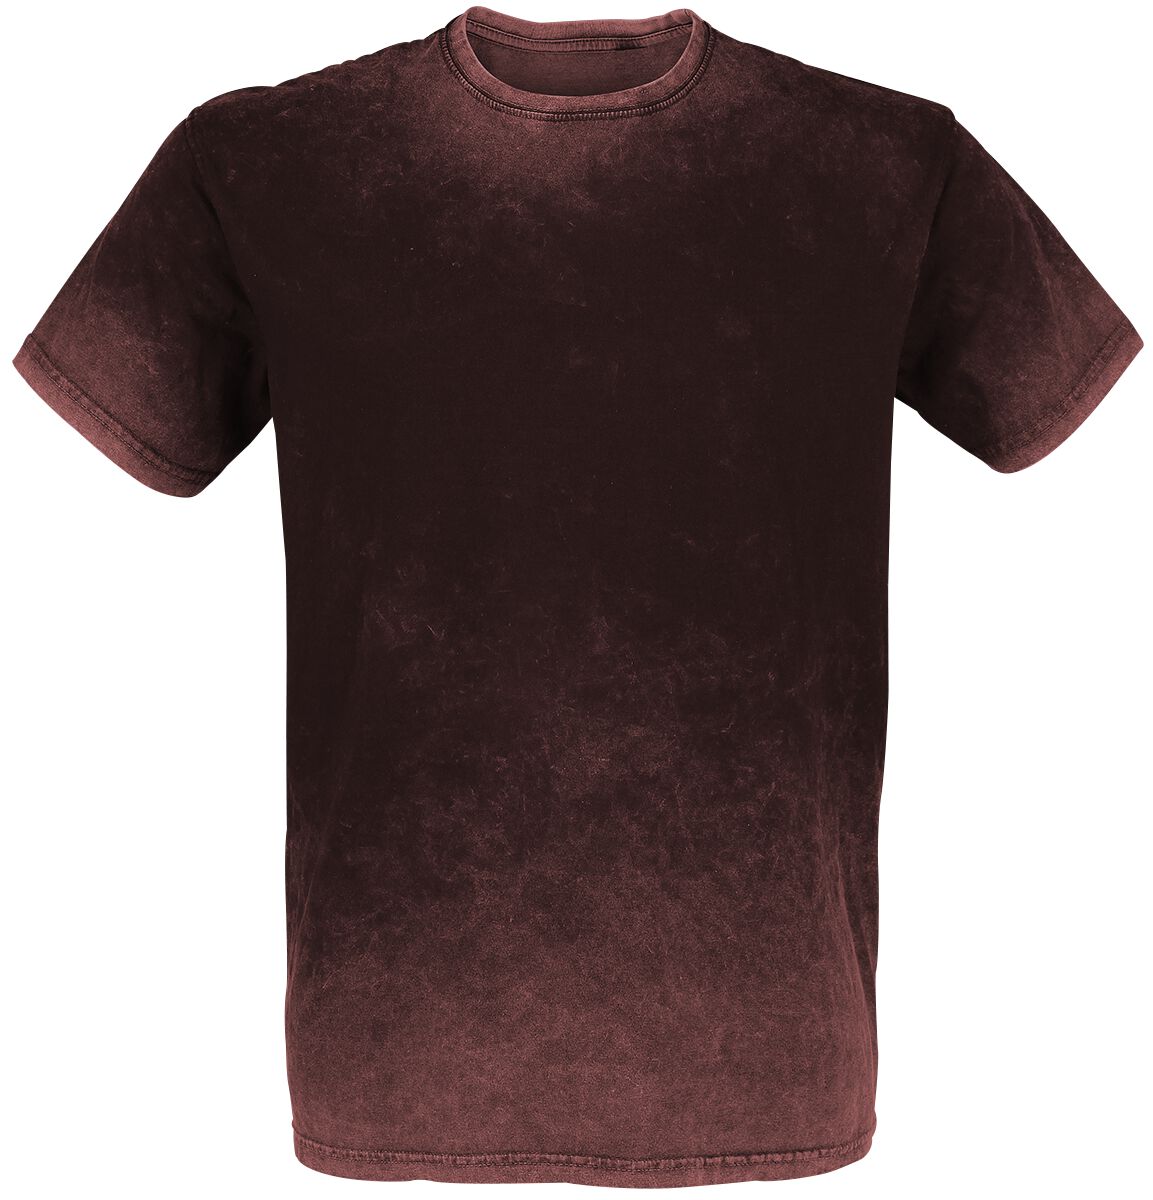 Outer Vision Retro Stone T-Shirt bordeaux in XXL